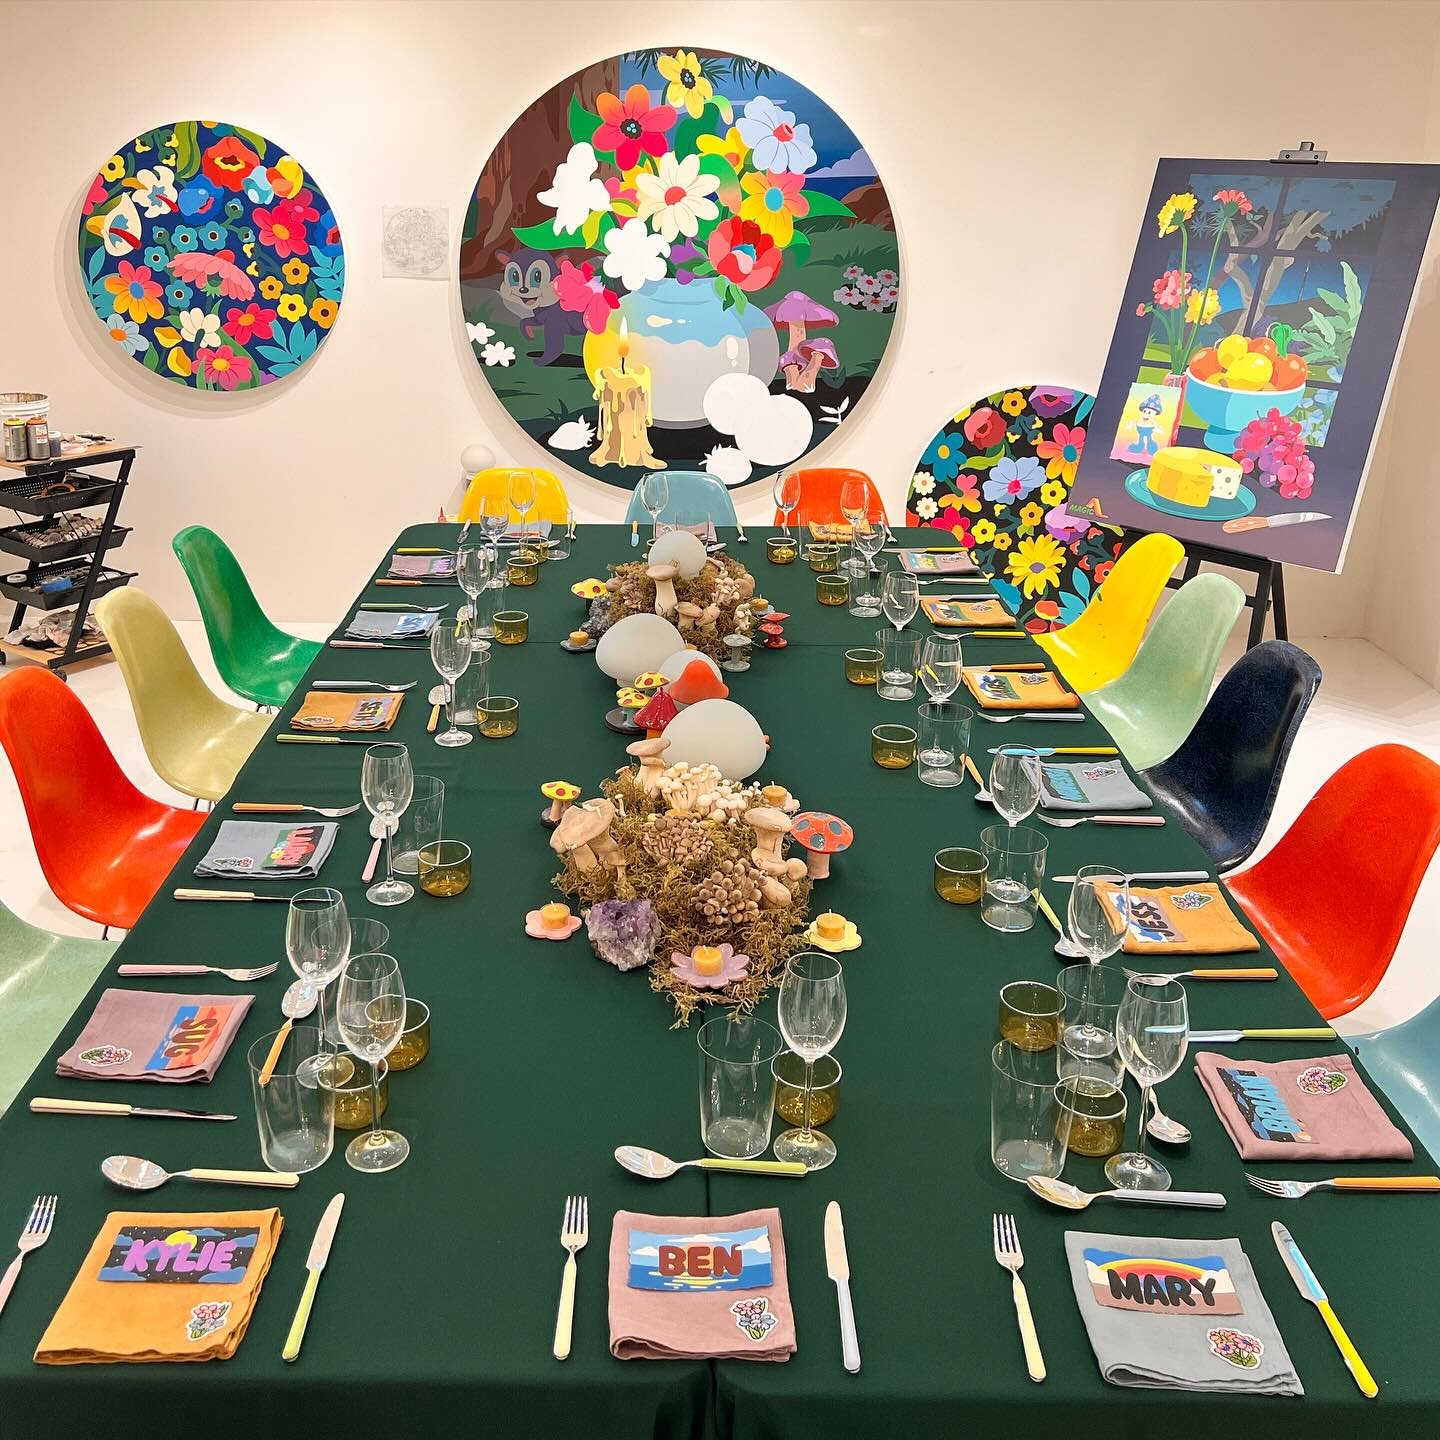 This weekend we created a very special dinner party with our brilliant friends @benshewry @kylie_shewry in our studio.
The purpose was a celebration of friendship and the creative community that we are lucky to be apart of.
So thankful to all our won